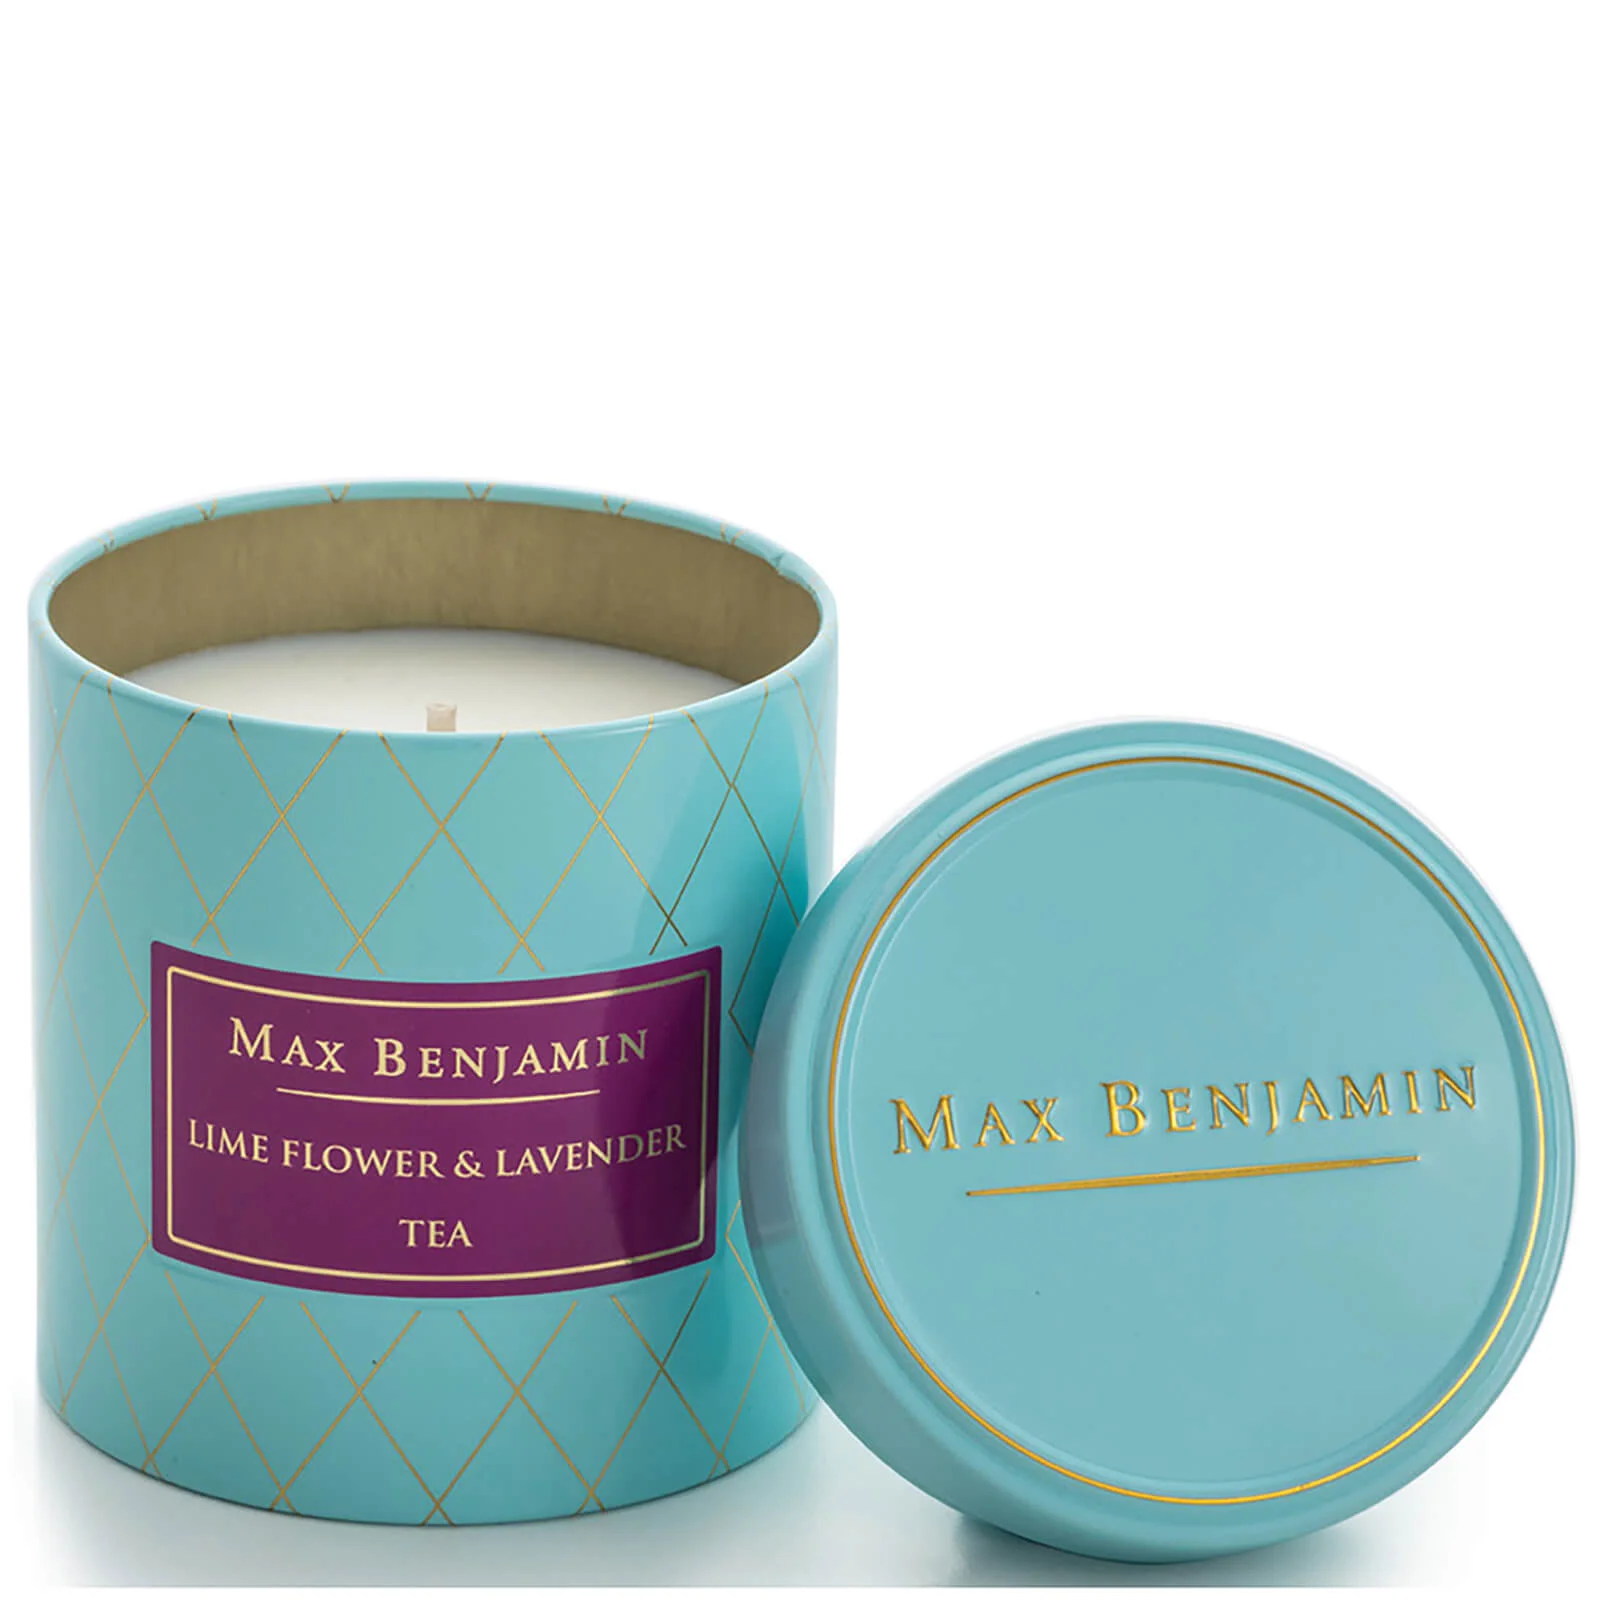 Max Benjamin Scented Candle - Lime Flower and Lavender Image 1